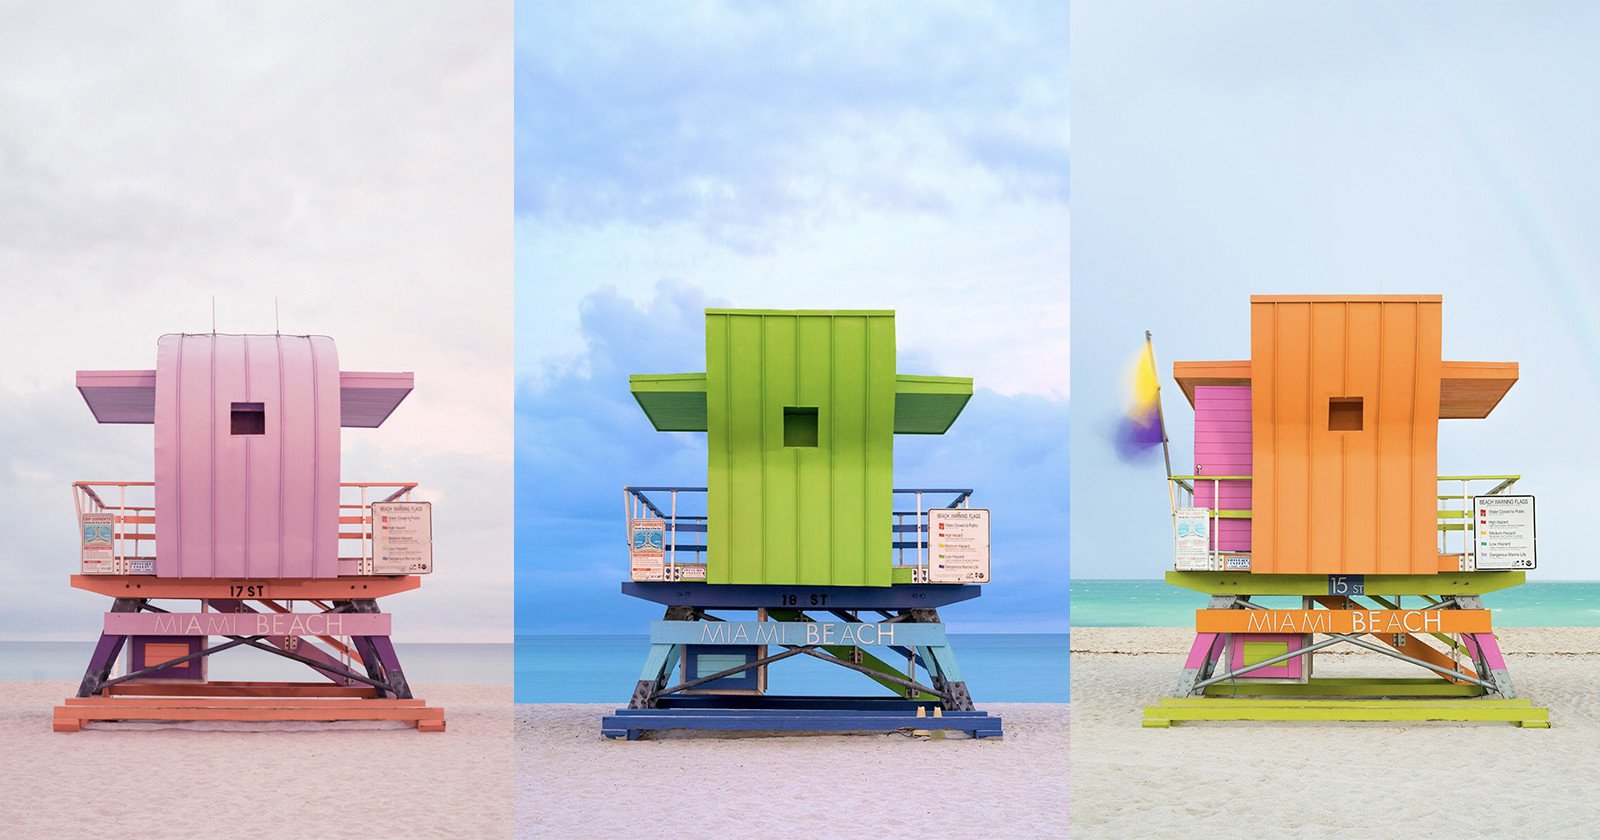 Cheerful Photo Series Highlights Miamis Colorful Lifeguard Towers